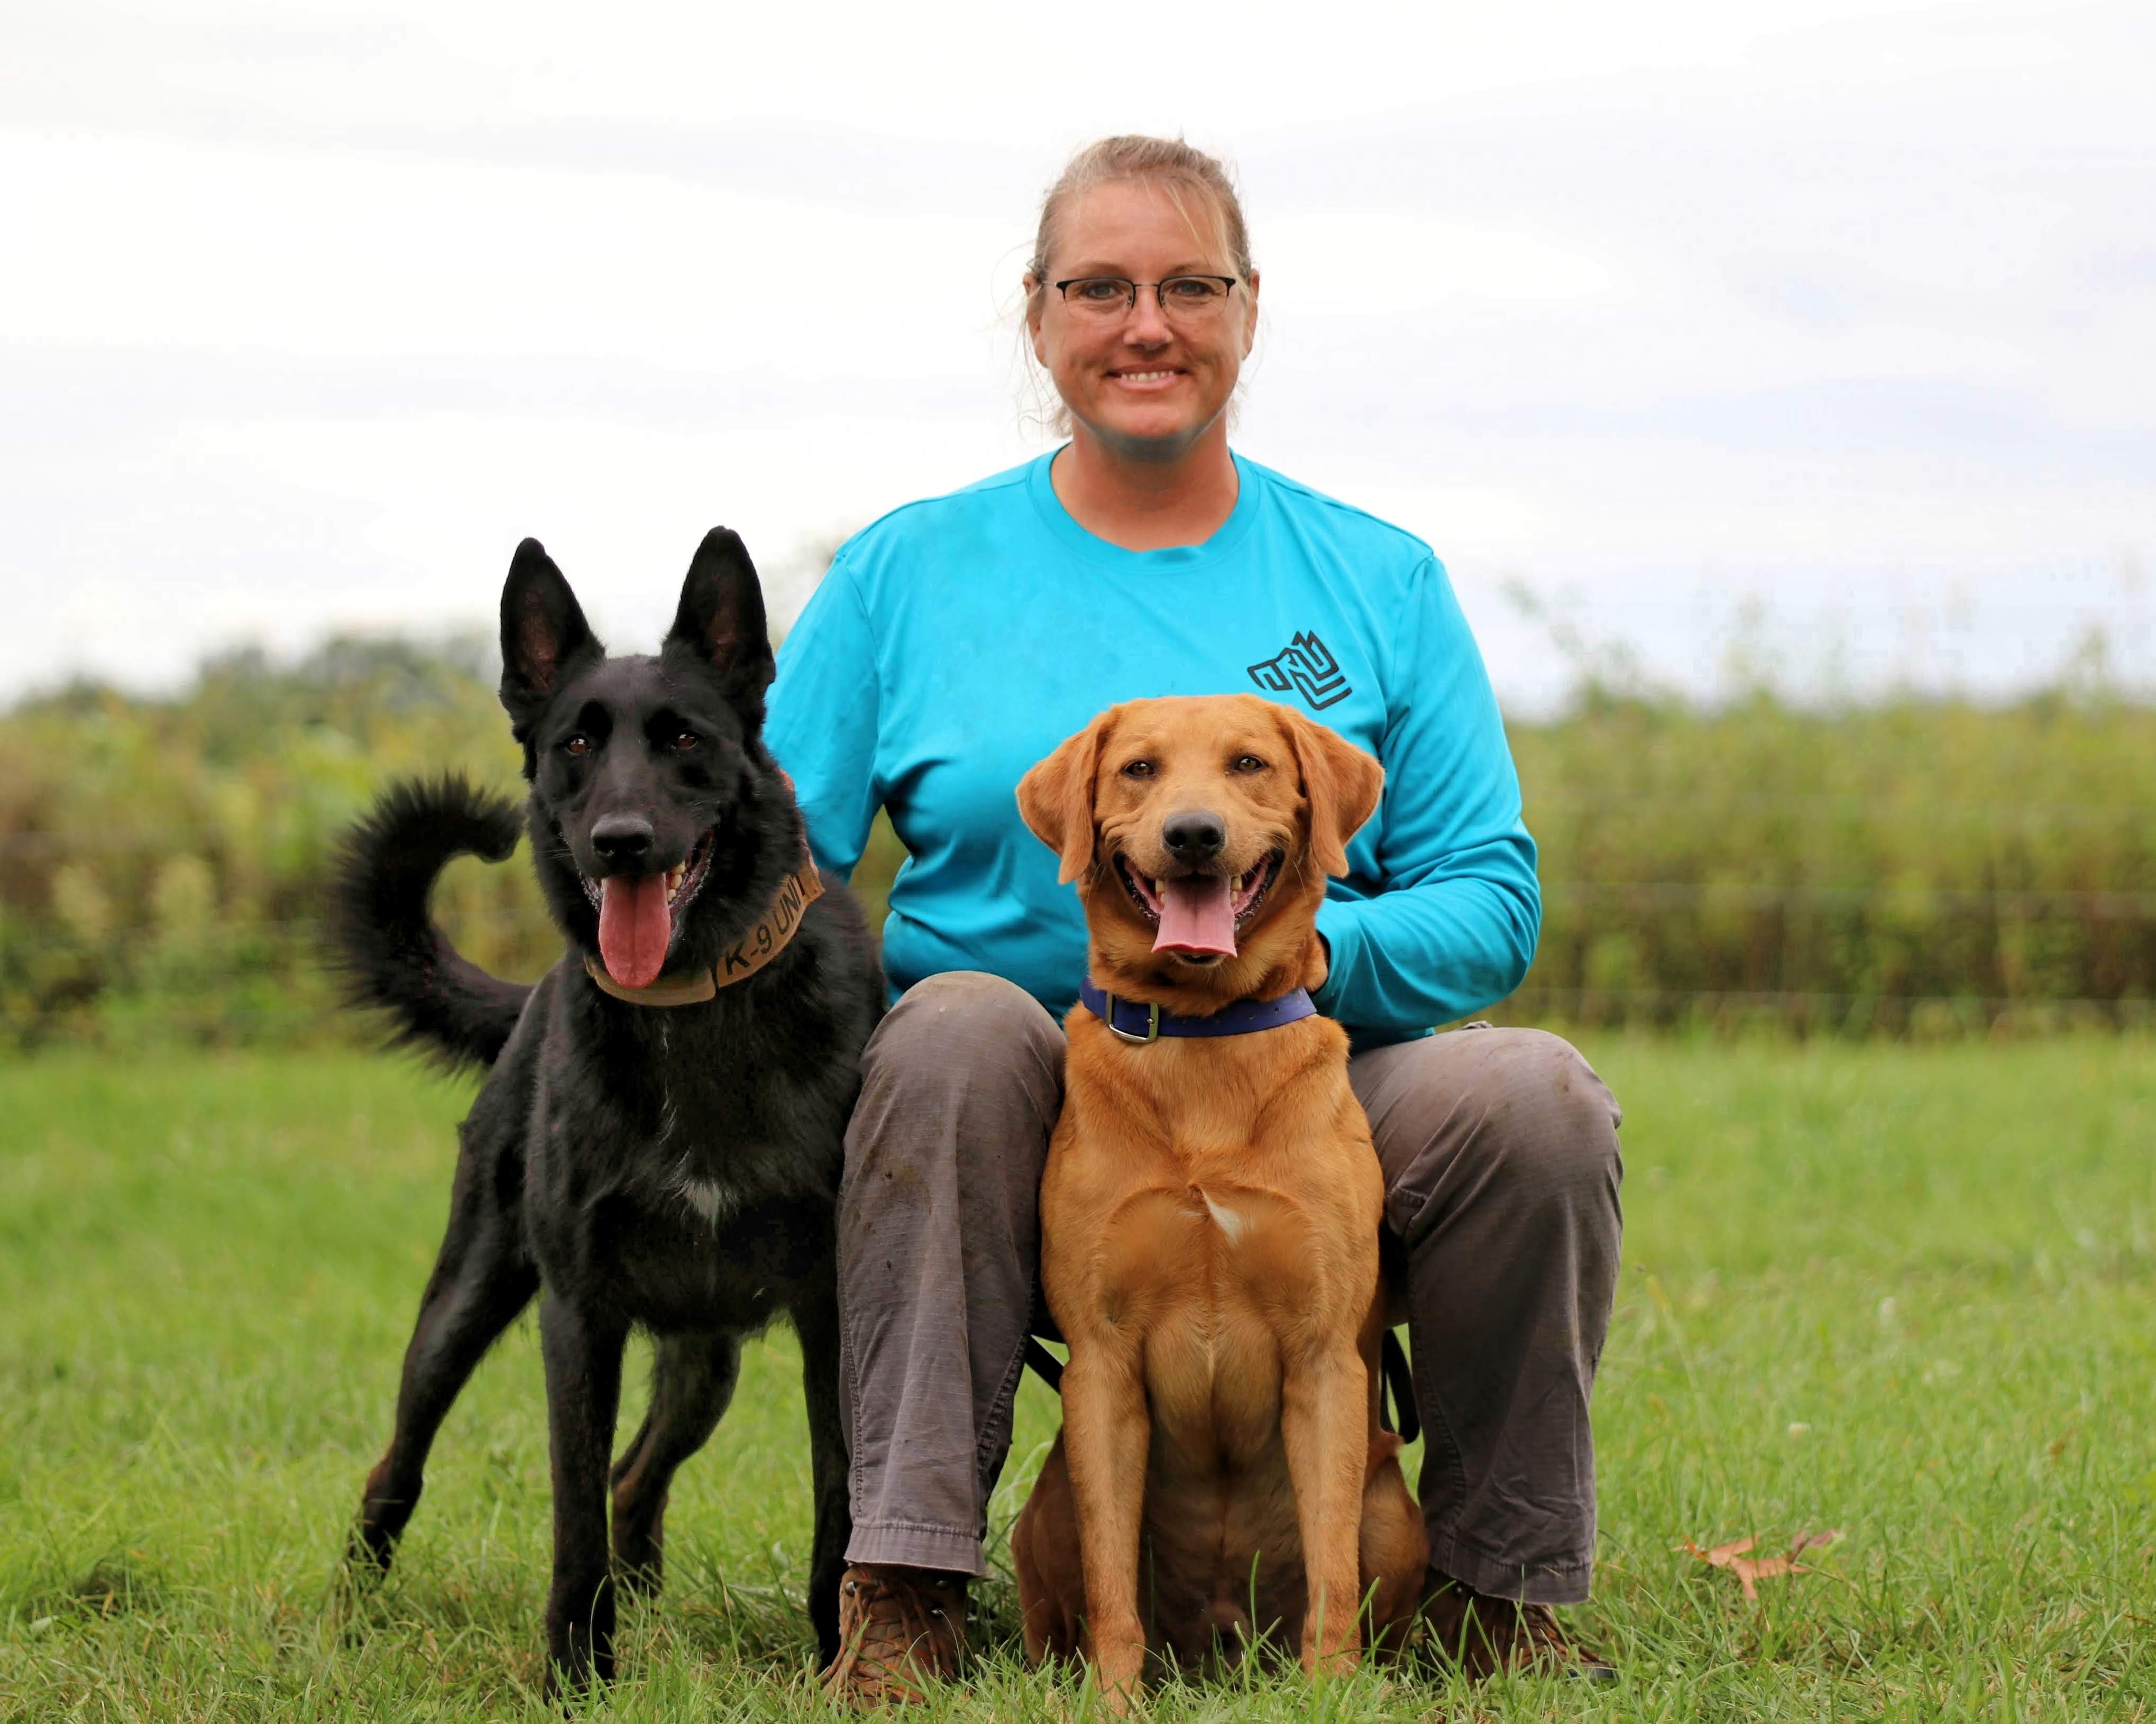 Woman with blond hair pulled back wearing a blue shirt sitting in a field with a labrador and a shepherd dog